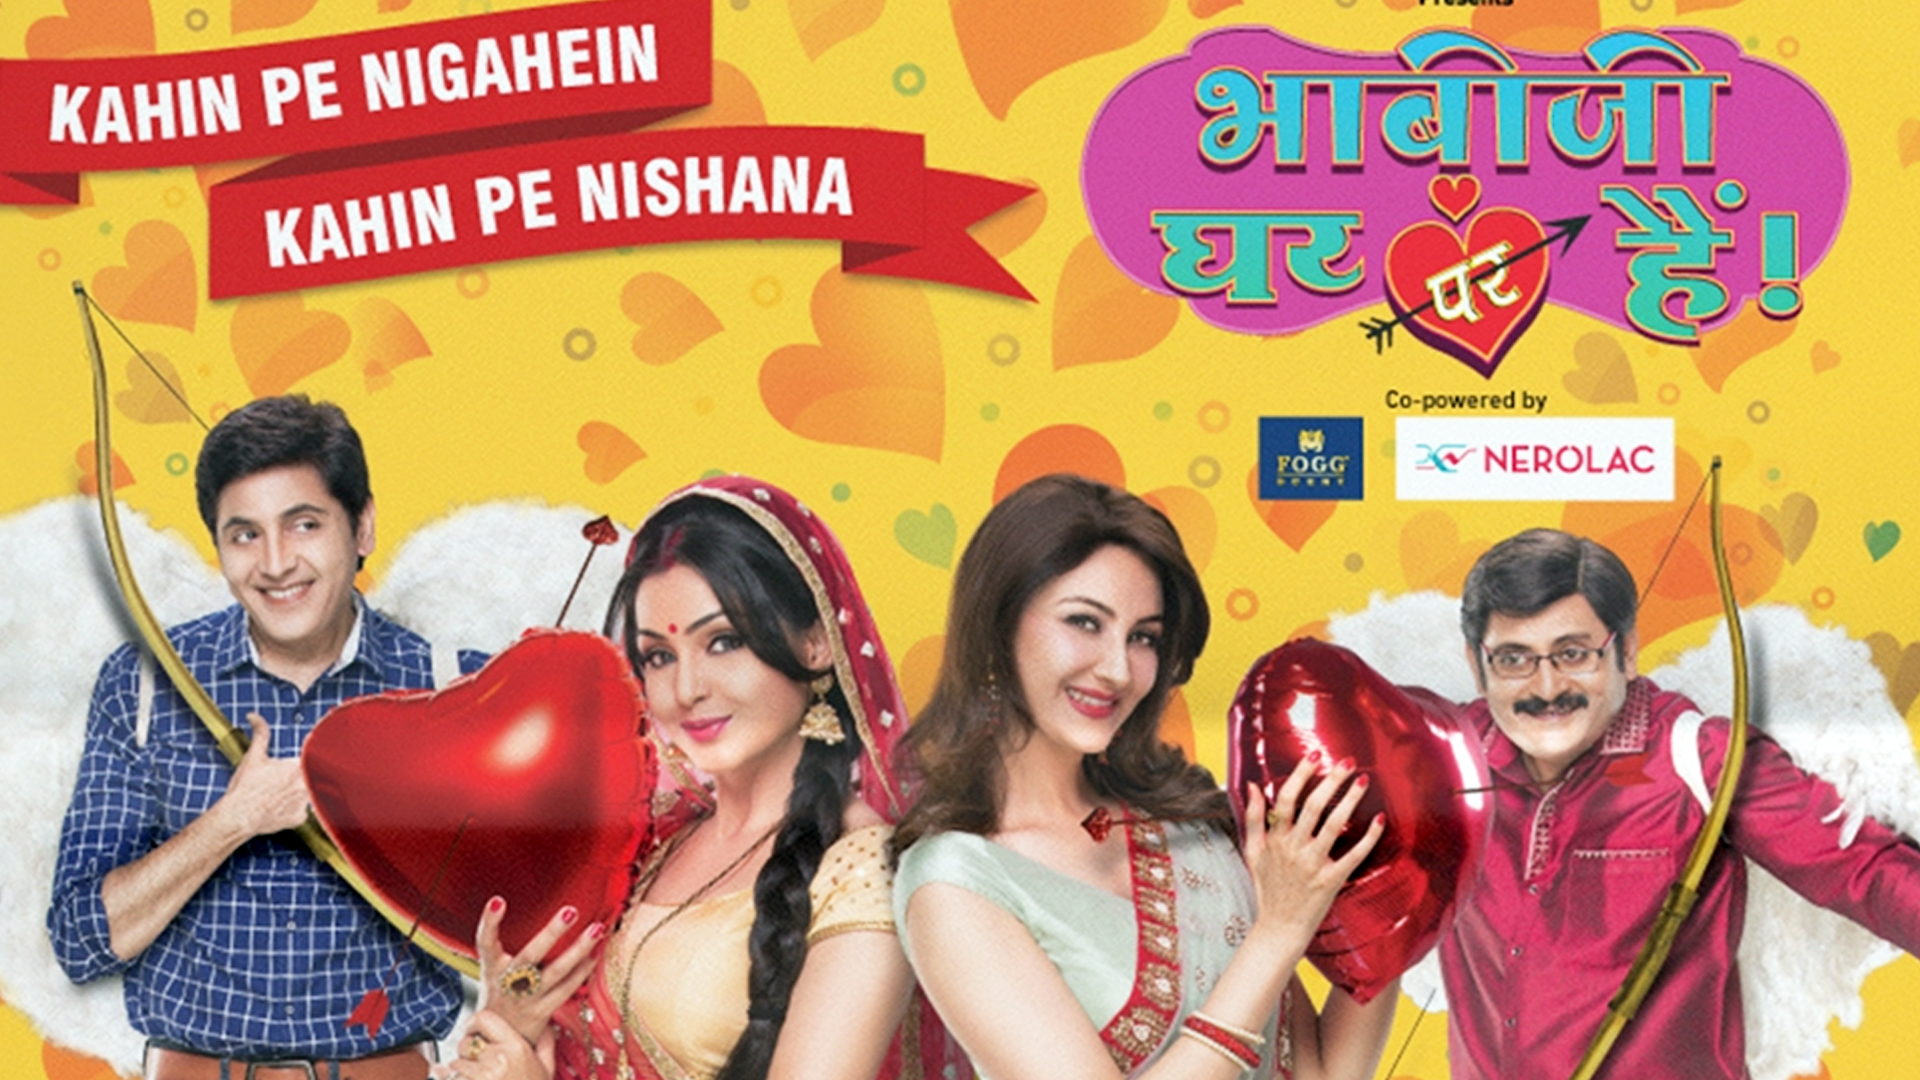 Election commission sends notice to Bhabhiji Ghar Pe Hain, makers to respond to soon